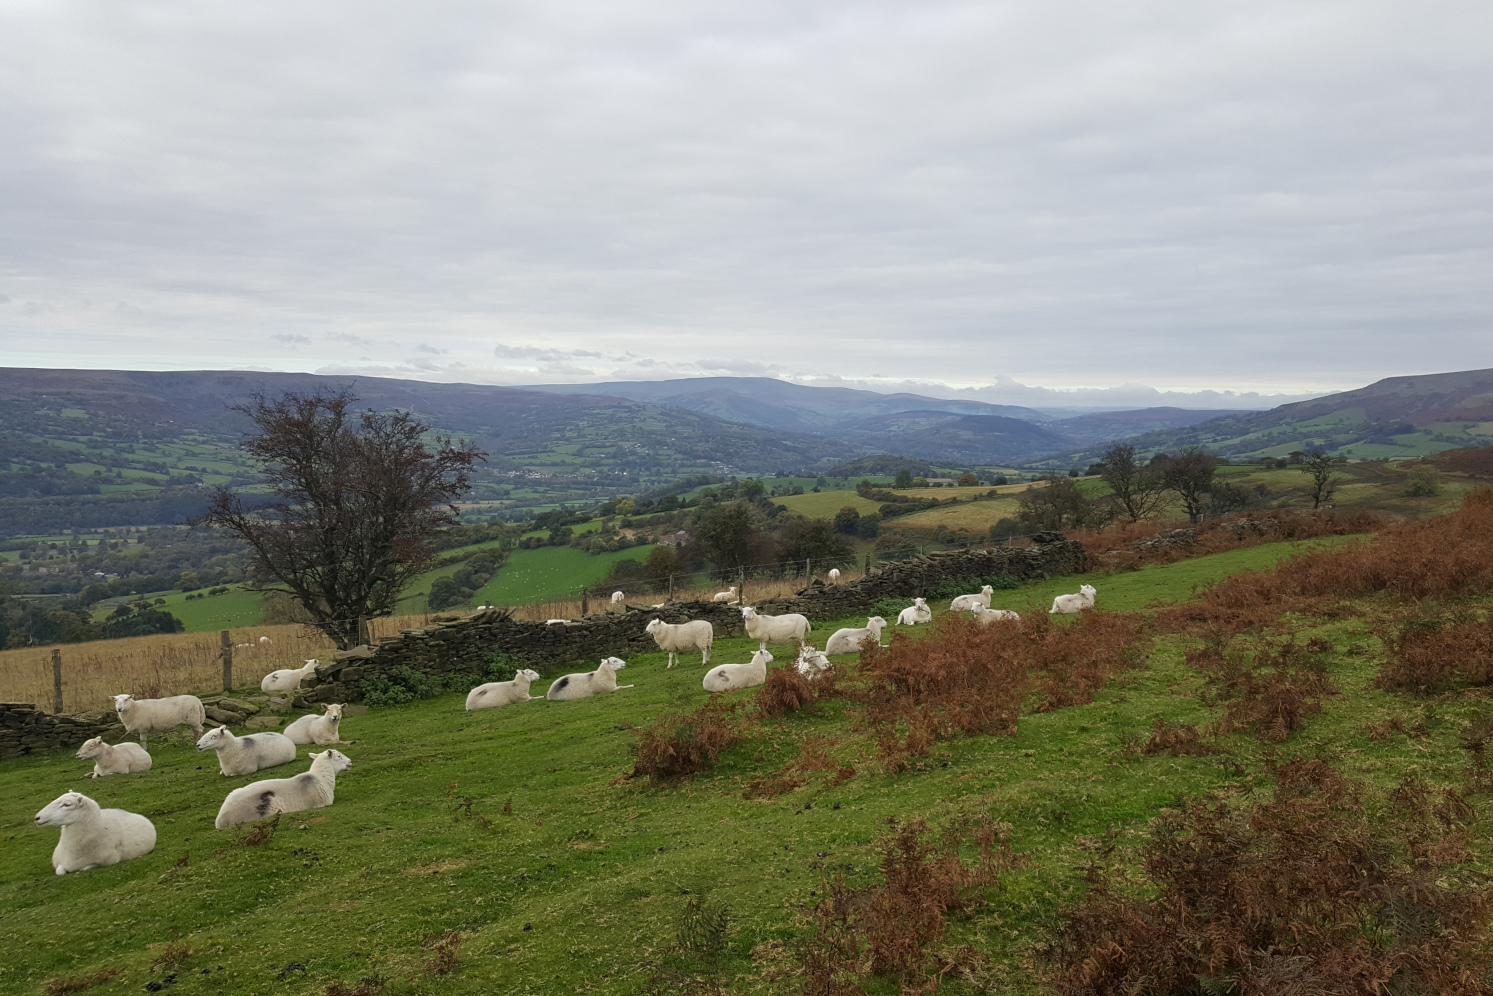 Views of valleys and hills of Brecon Beacons, with a herd of sheep during the Sugar Loaf hike